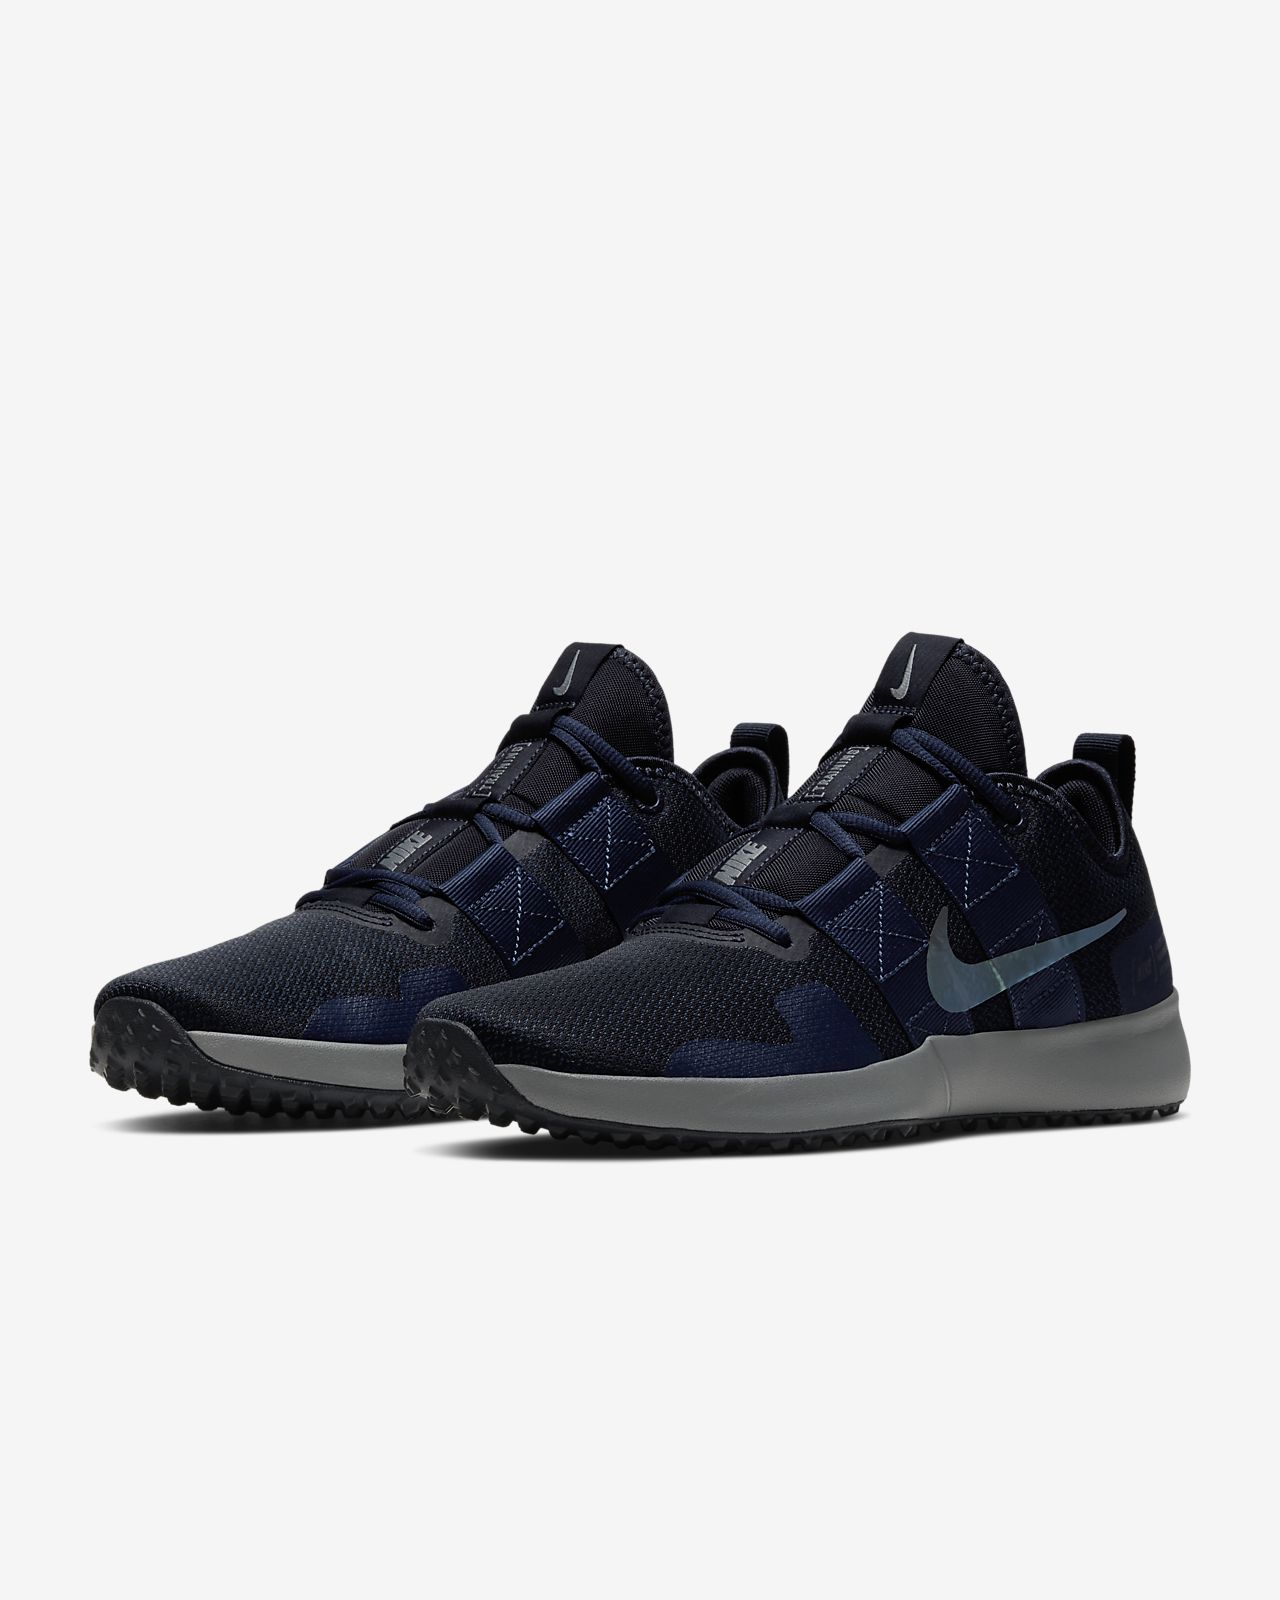 nike varsity compete trainer wide